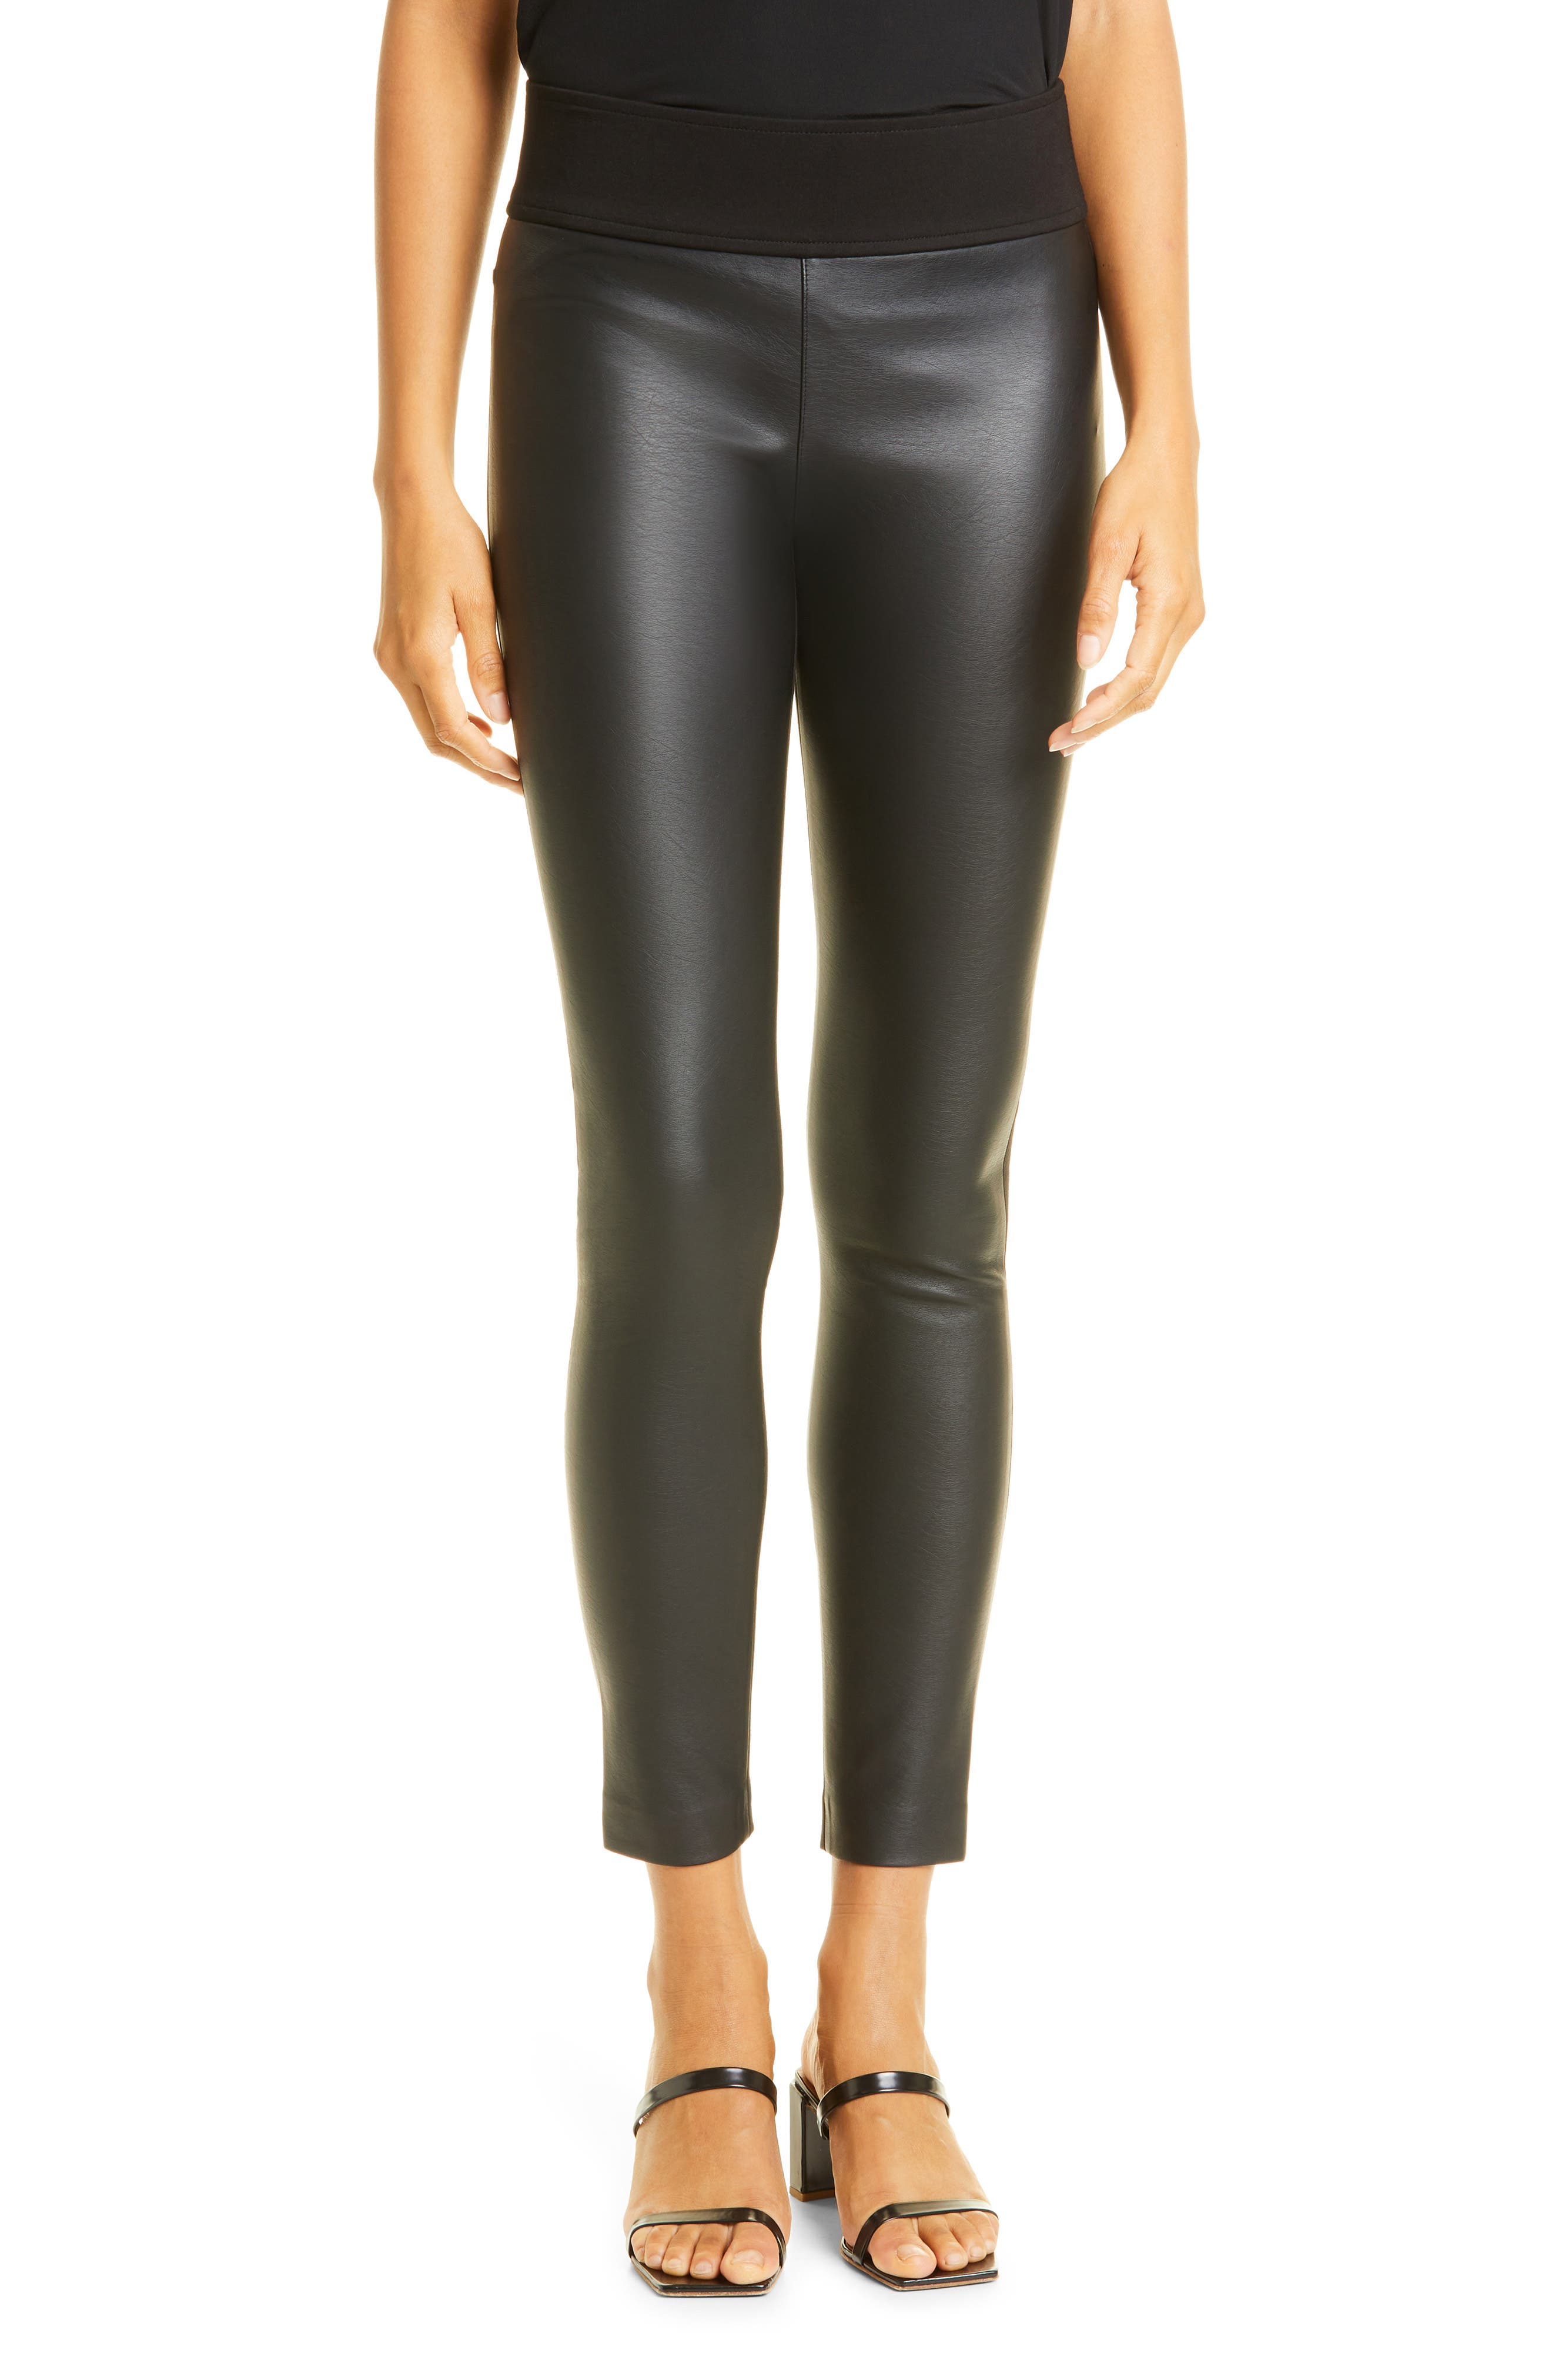 In All Plus Size Designer Inspired 100% Genuine Leather Legging Forest Night